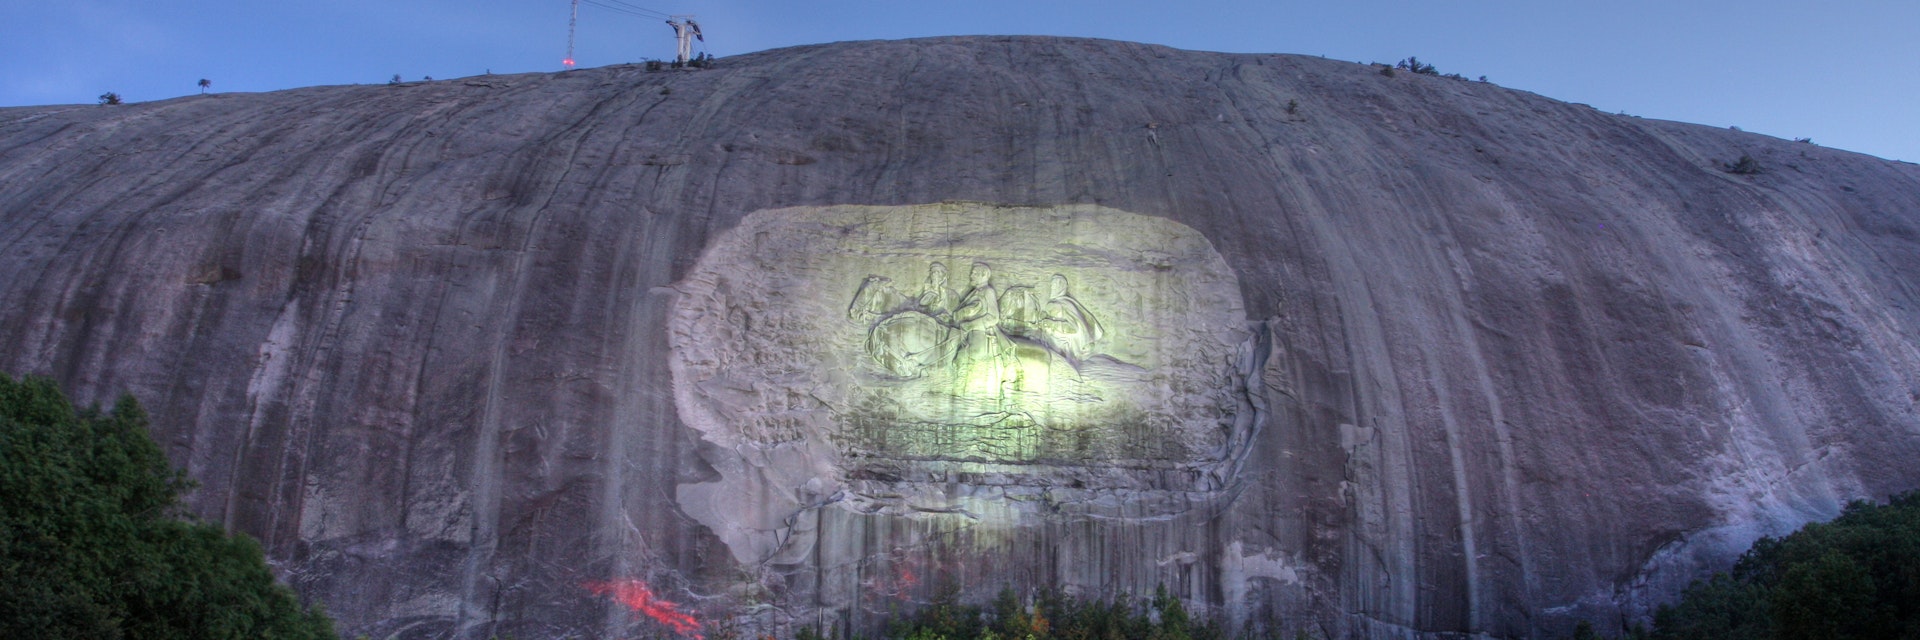 fireworks at Stone Mountain in Atlanta; Shutterstock ID 35528275; your: Bridget Brown; gl: 65050; netsuite: Online Editorial; full: POI Image Update